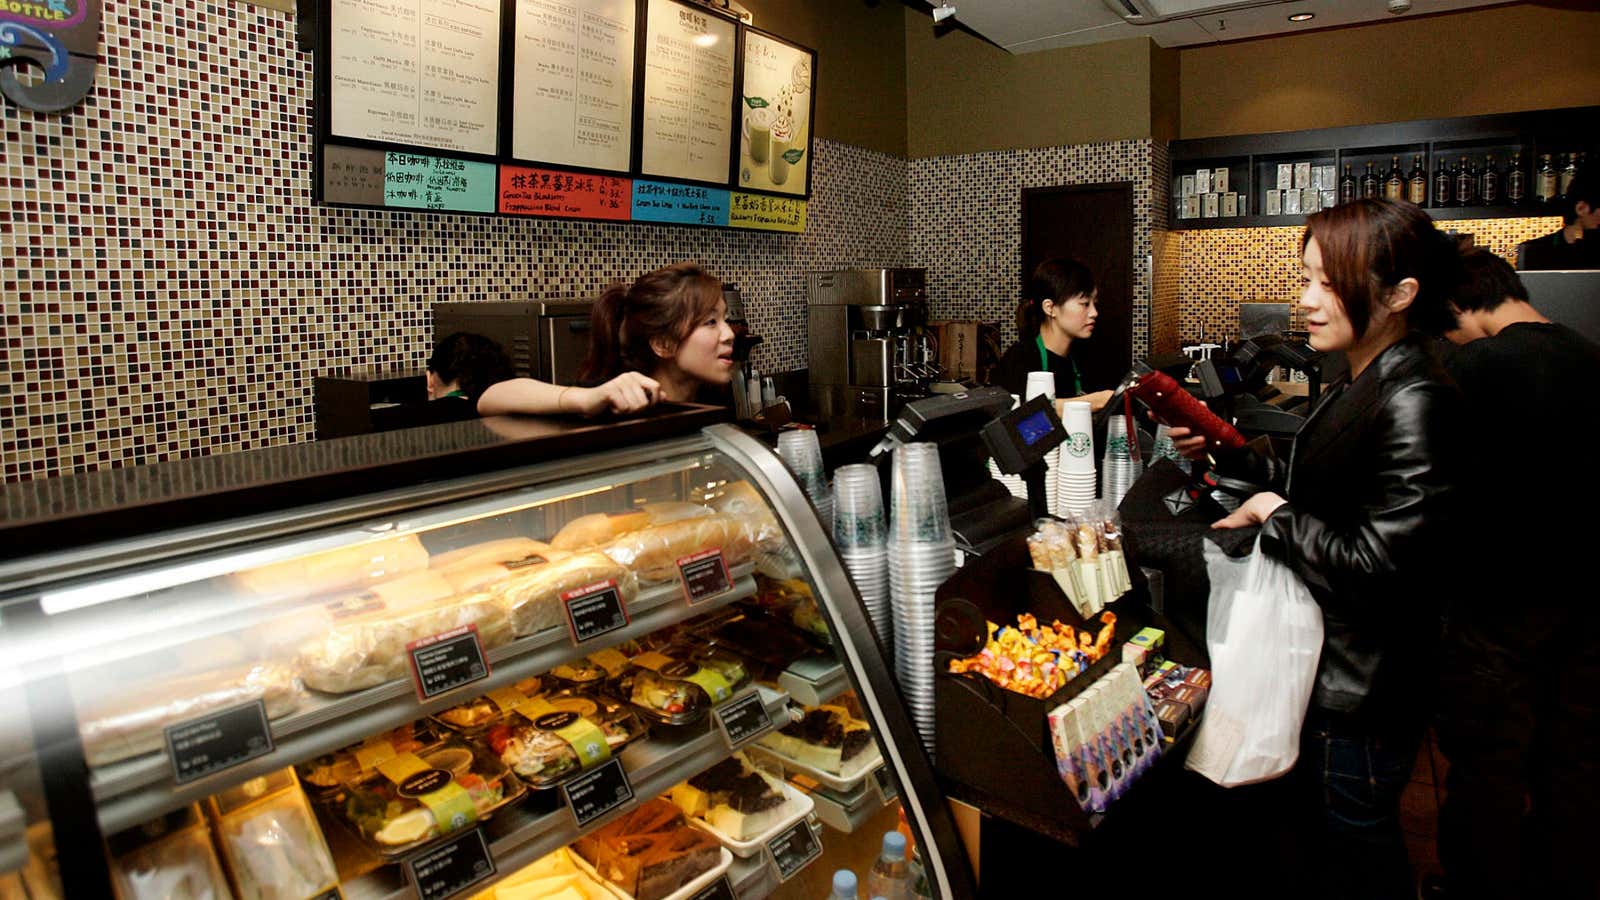 Soon enough, customers in China won’t have to find a Starbucks store to get their Starbucks fix.